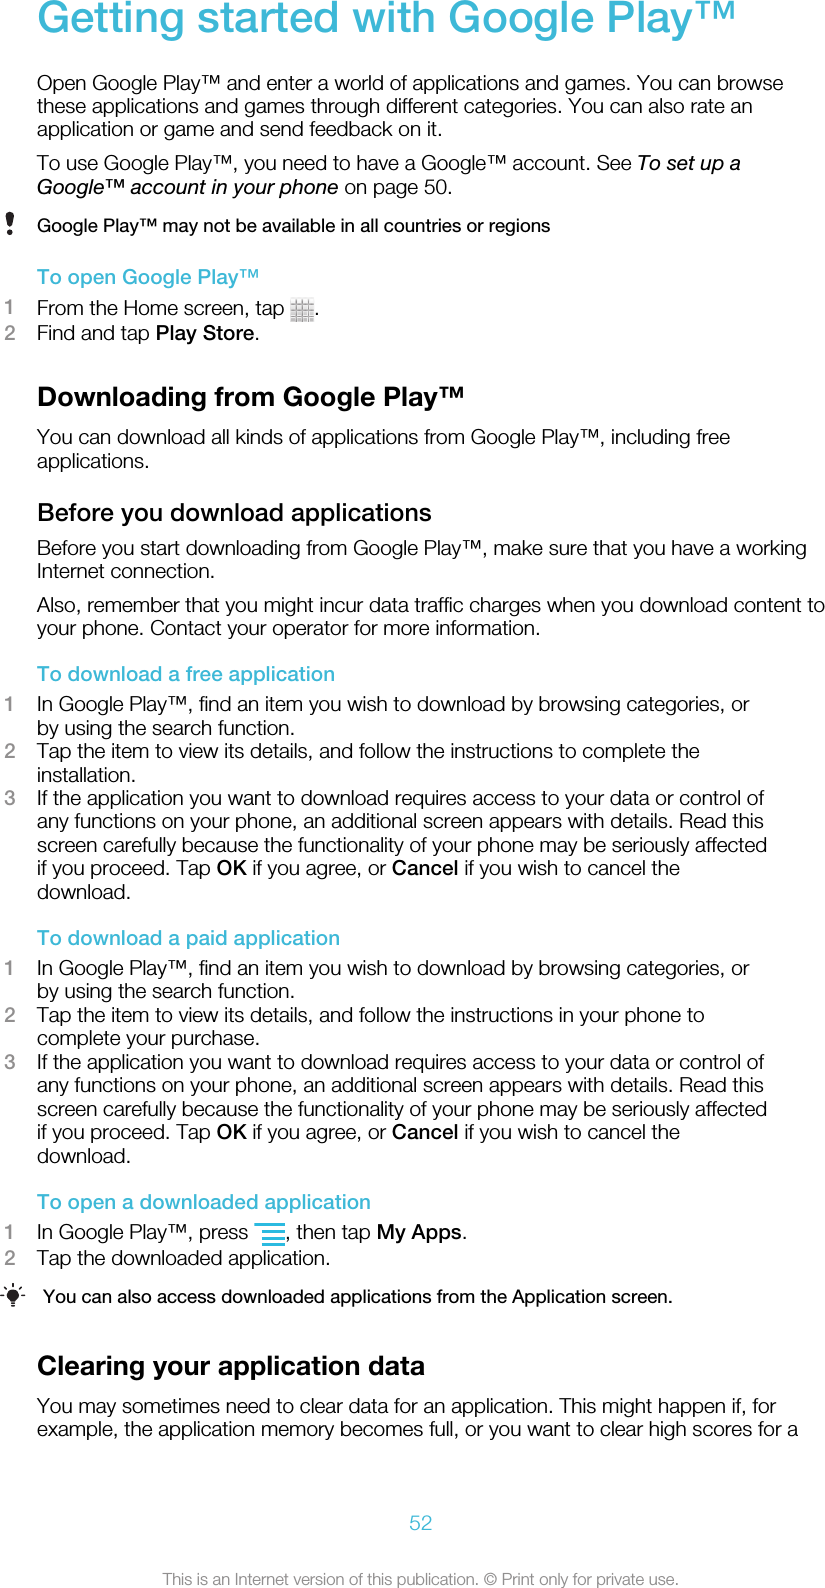 Getting started with Google Play™Open Google Play™ and enter a world of applications and games. You can browsethese applications and games through different categories. You can also rate anapplication or game and send feedback on it.To use Google Play™, you need to have a Google™ account. See To set up aGoogle™ account in your phone on page 50.Google Play™ may not be available in all countries or regionsTo open Google Play™1From the Home screen, tap  .2Find and tap Play Store.Downloading from Google Play™You can download all kinds of applications from Google Play™, including freeapplications.Before you download applicationsBefore you start downloading from Google Play™, make sure that you have a workingInternet connection.Also, remember that you might incur data traffic charges when you download content toyour phone. Contact your operator for more information.To download a free application1In Google Play™, find an item you wish to download by browsing categories, orby using the search function.2Tap the item to view its details, and follow the instructions to complete theinstallation.3If the application you want to download requires access to your data or control ofany functions on your phone, an additional screen appears with details. Read thisscreen carefully because the functionality of your phone may be seriously affectedif you proceed. Tap OK if you agree, or Cancel if you wish to cancel thedownload.To download a paid application1In Google Play™, find an item you wish to download by browsing categories, orby using the search function.2Tap the item to view its details, and follow the instructions in your phone tocomplete your purchase.3If the application you want to download requires access to your data or control ofany functions on your phone, an additional screen appears with details. Read thisscreen carefully because the functionality of your phone may be seriously affectedif you proceed. Tap OK if you agree, or Cancel if you wish to cancel thedownload.To open a downloaded application1In Google Play™, press  , then tap My Apps.2Tap the downloaded application.You can also access downloaded applications from the Application screen.Clearing your application dataYou may sometimes need to clear data for an application. This might happen if, forexample, the application memory becomes full, or you want to clear high scores for a52This is an Internet version of this publication. © Print only for private use.